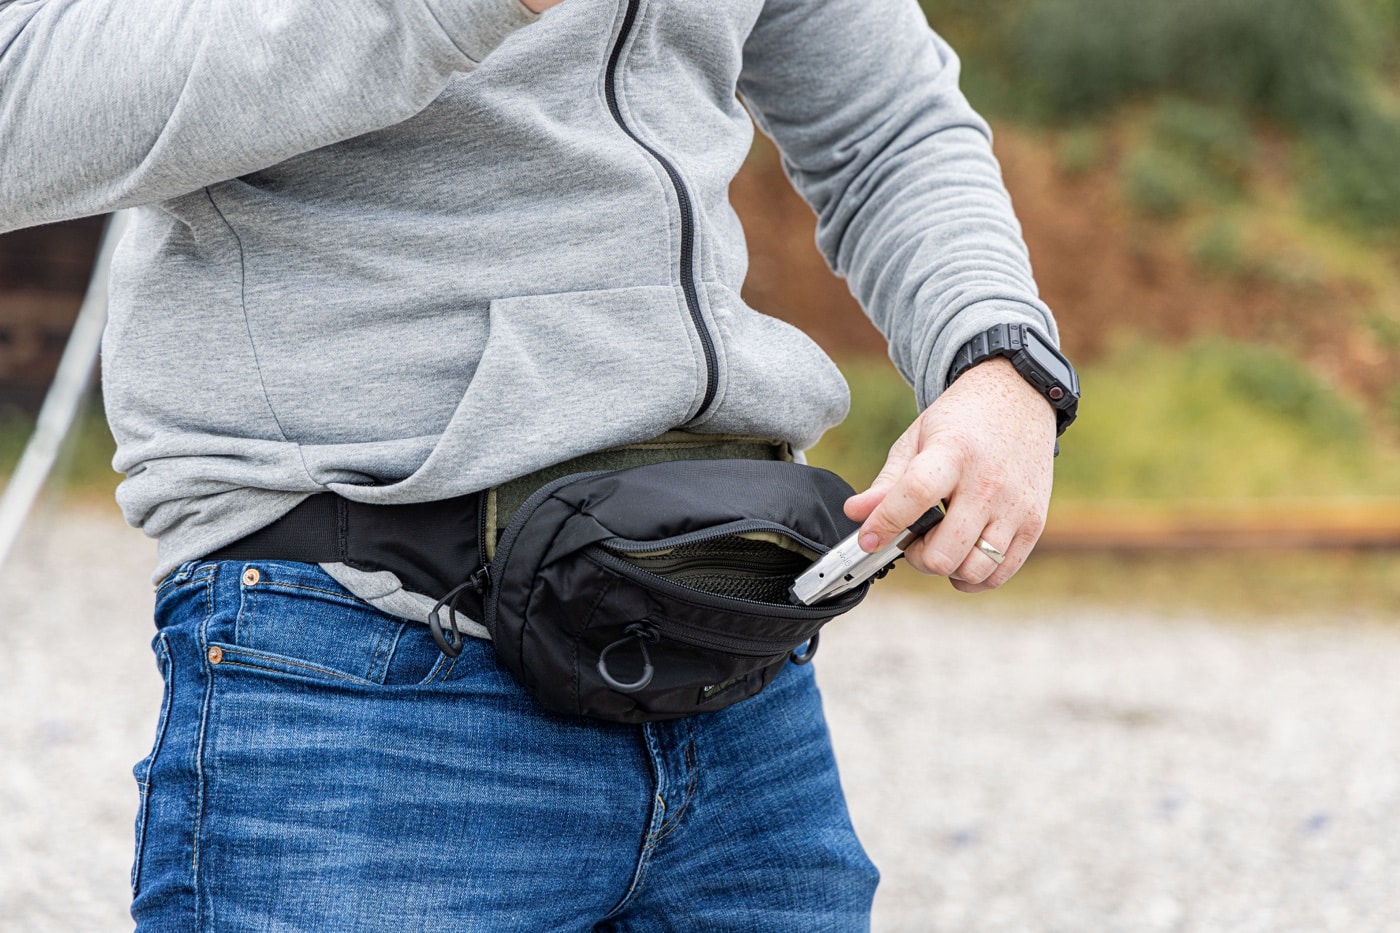 carrying a spare magazine in a waist pack